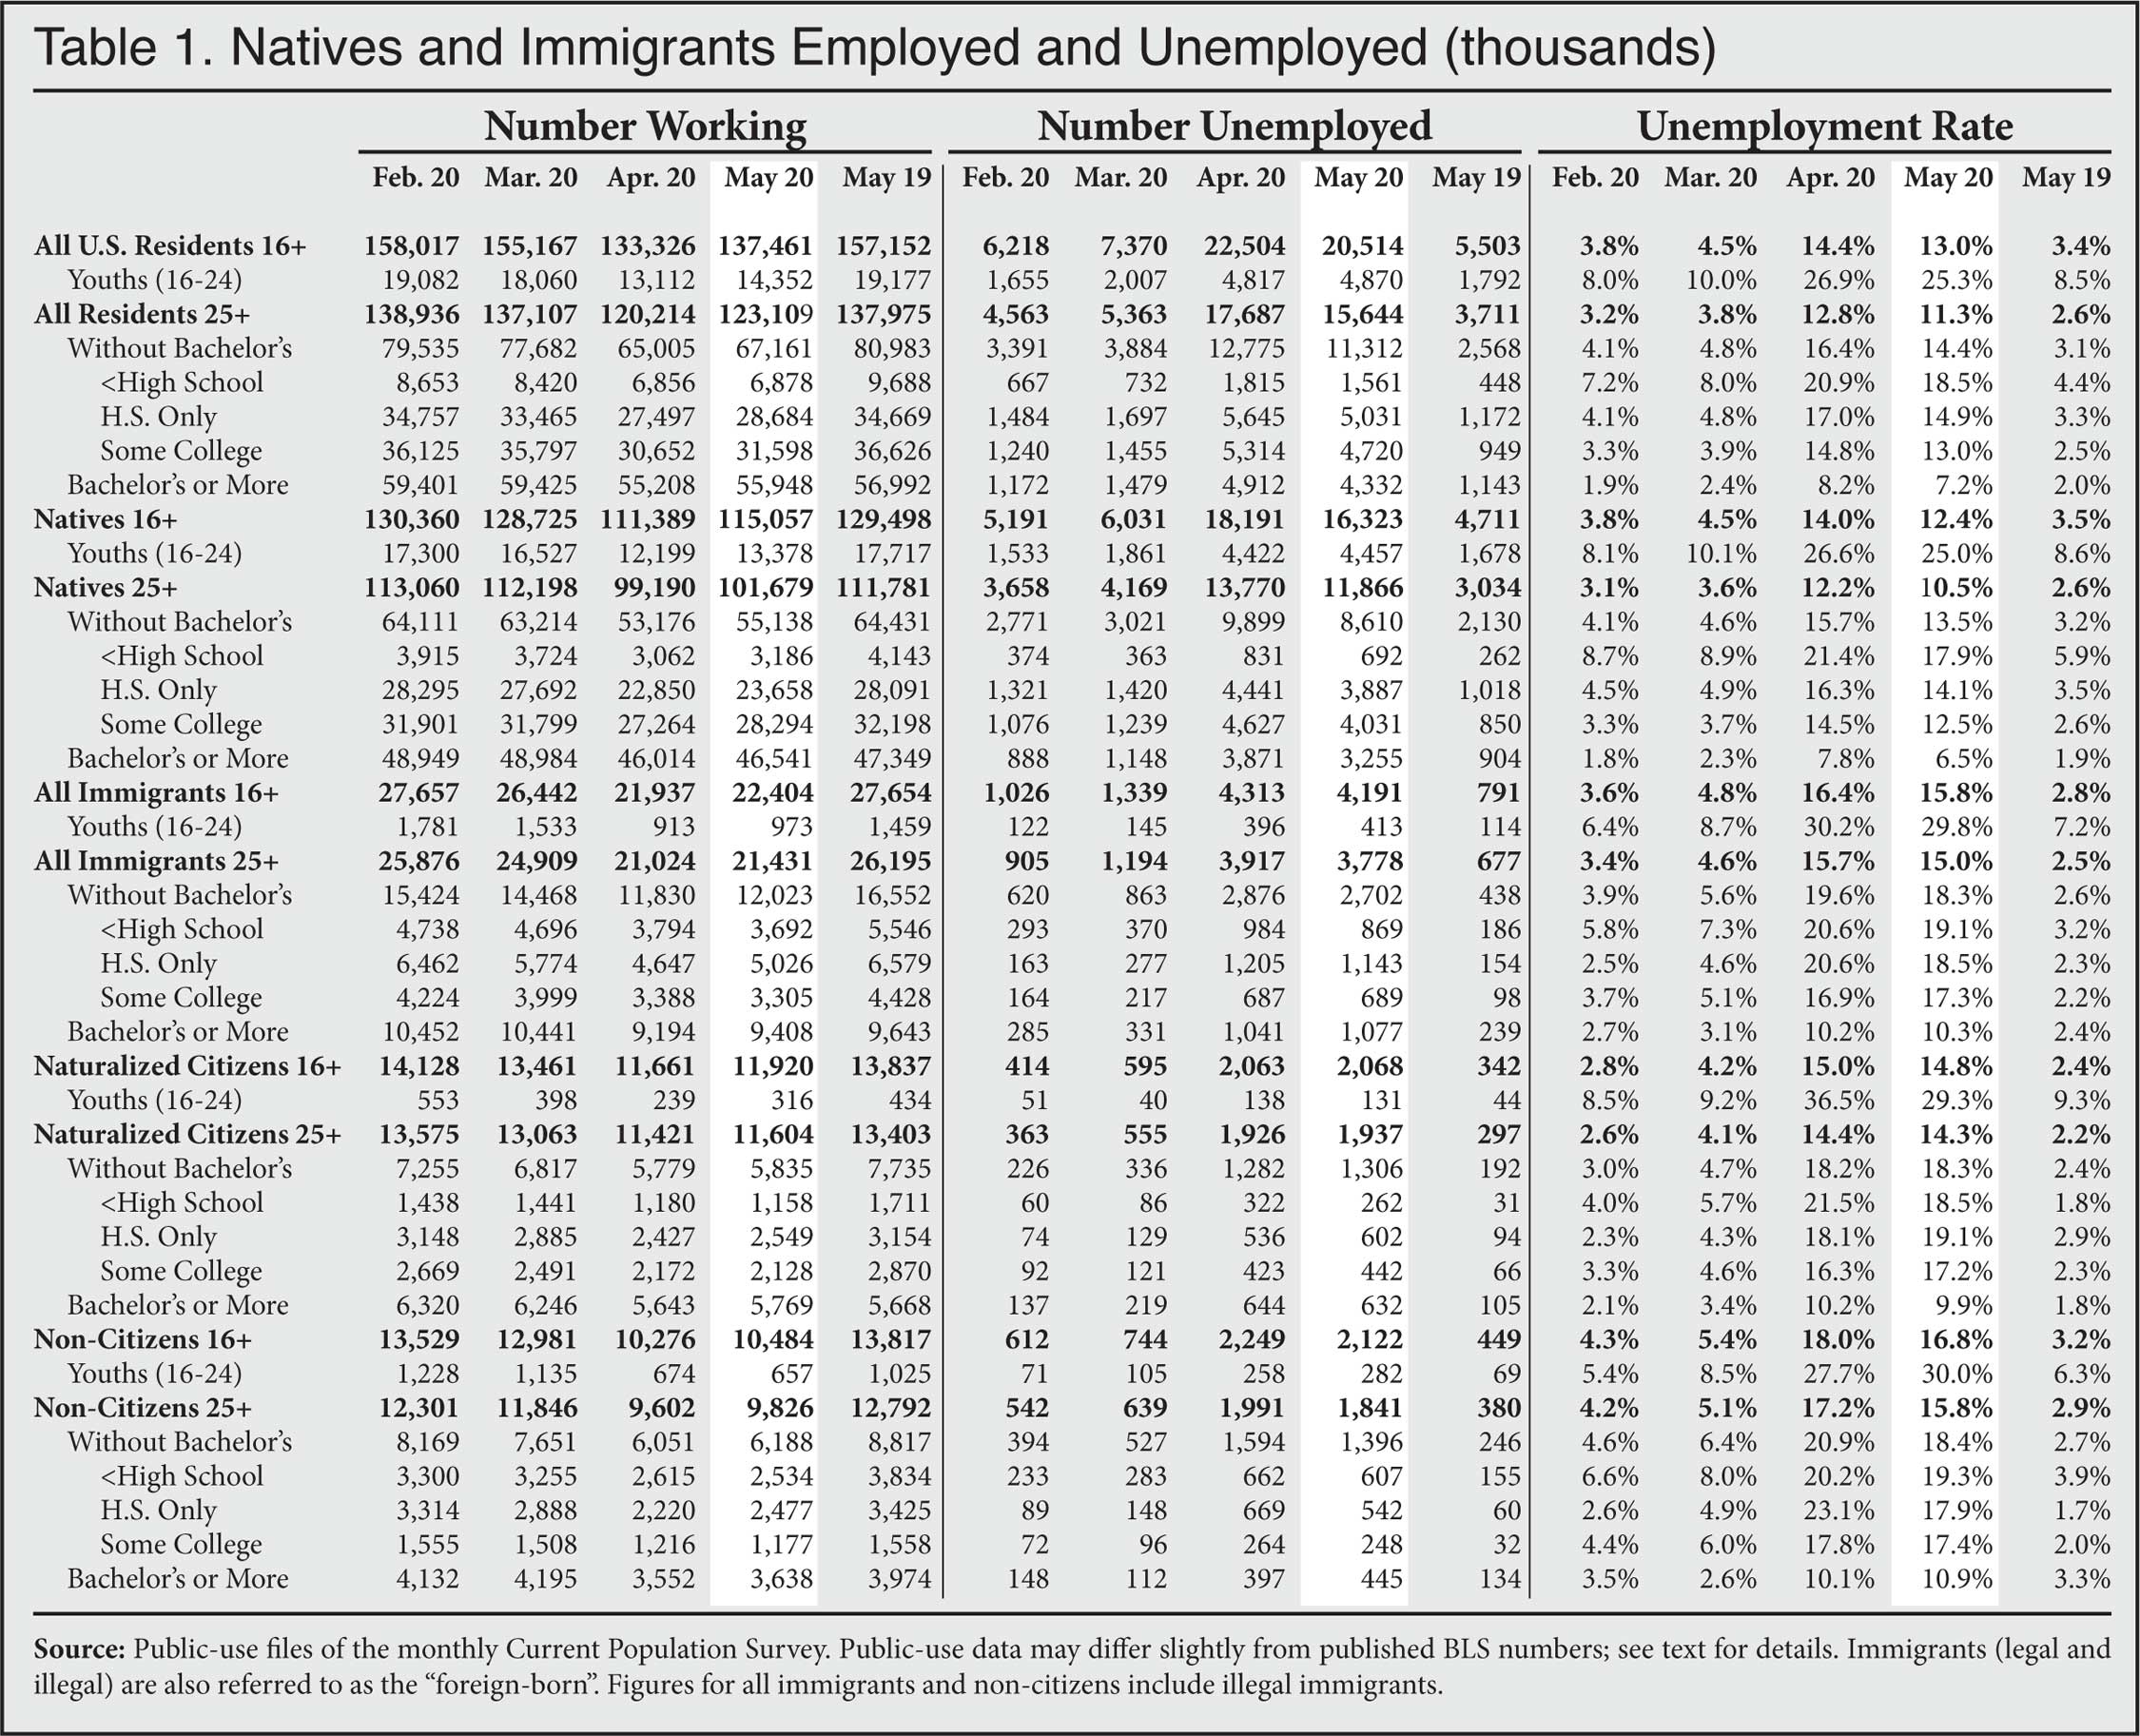 Table: Natives and Immigrants Employed and Unemployed